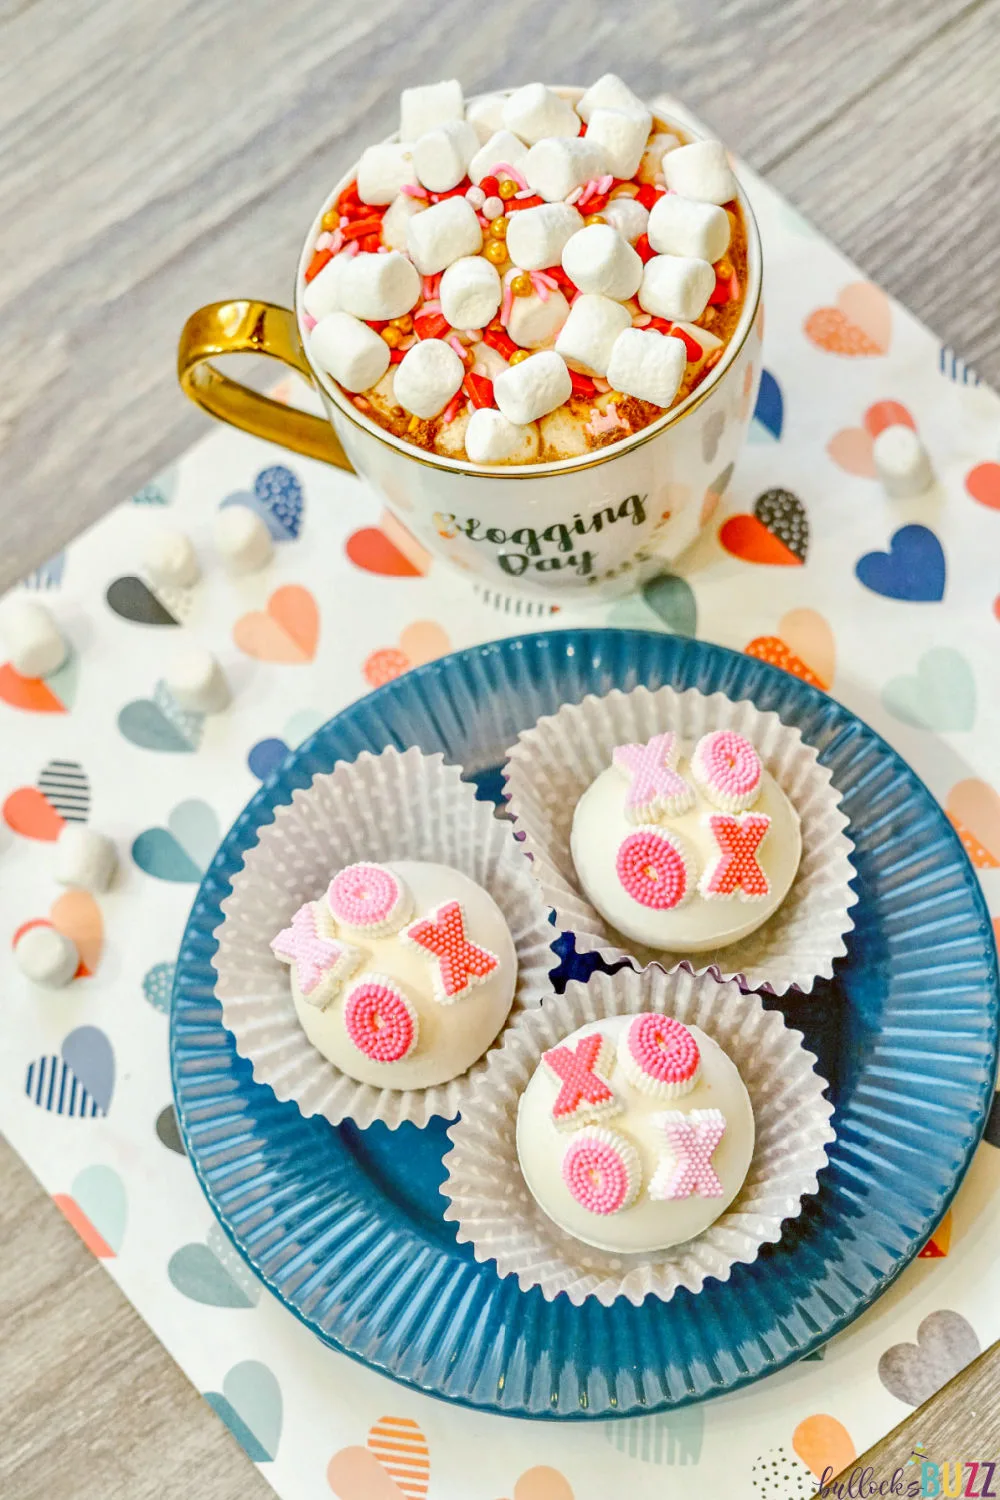 These XOXO Valentine's Day Hot Cocoa Bombs are so much fun to make and even more fun to enjoy! They might look complicated, but with a little practice and the right ingredients and tools, making them is easier than you think!